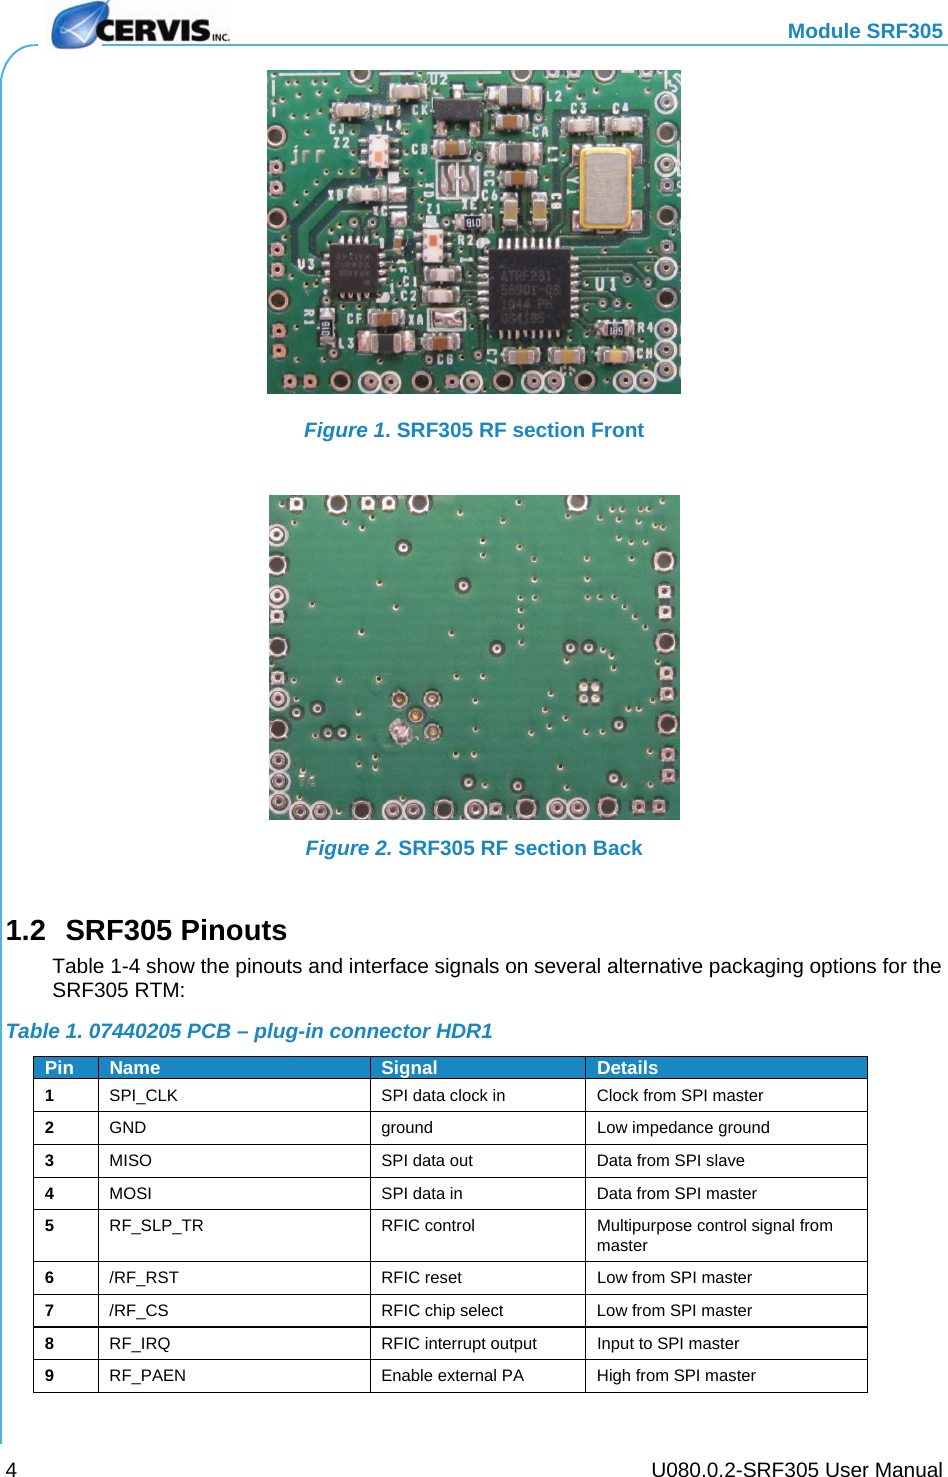   Module SRF305     U080.0.2-SRF305 User Manual 4  Figure 1. SRF305 RF section Front   Figure 2. SRF305 RF section Back  1.2 SRF305 Pinouts Table 1-4 show the pinouts and interface signals on several alternative packaging options for the SRF305 RTM: Table 1. 07440205 PCB – plug-in connector HDR1 Pin  Name  Signal Details1  SPI_CLK  SPI data clock in  Clock from SPI master 2  GND ground Low impedance ground 3  MISO  SPI data out  Data from SPI slave 4  MOSI  SPI data in  Data from SPI master 5  RF_SLP_TR RFIC control Multipurpose control signal from master 6  /RF_RST  RFIC reset  Low from SPI master 7  /RF_CS  RFIC chip select  Low from SPI master 8  RF_IRQ  RFIC interrupt output  Input to SPI master 9  RF_PAEN  Enable external PA  High from SPI master 